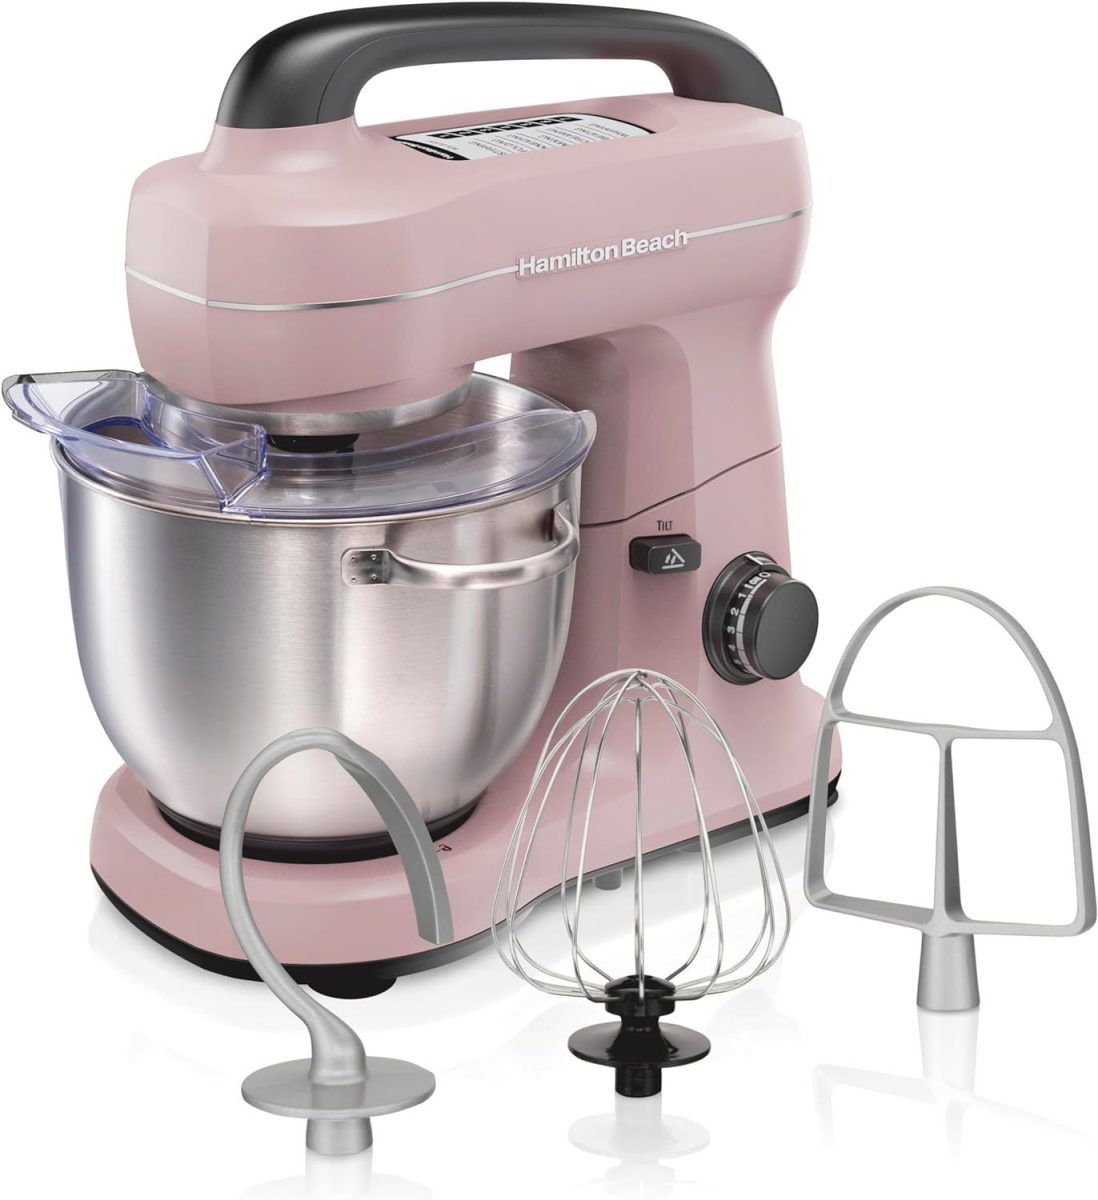 A pink Hamilton Beach stand mixer sits with its attachments against a white background.